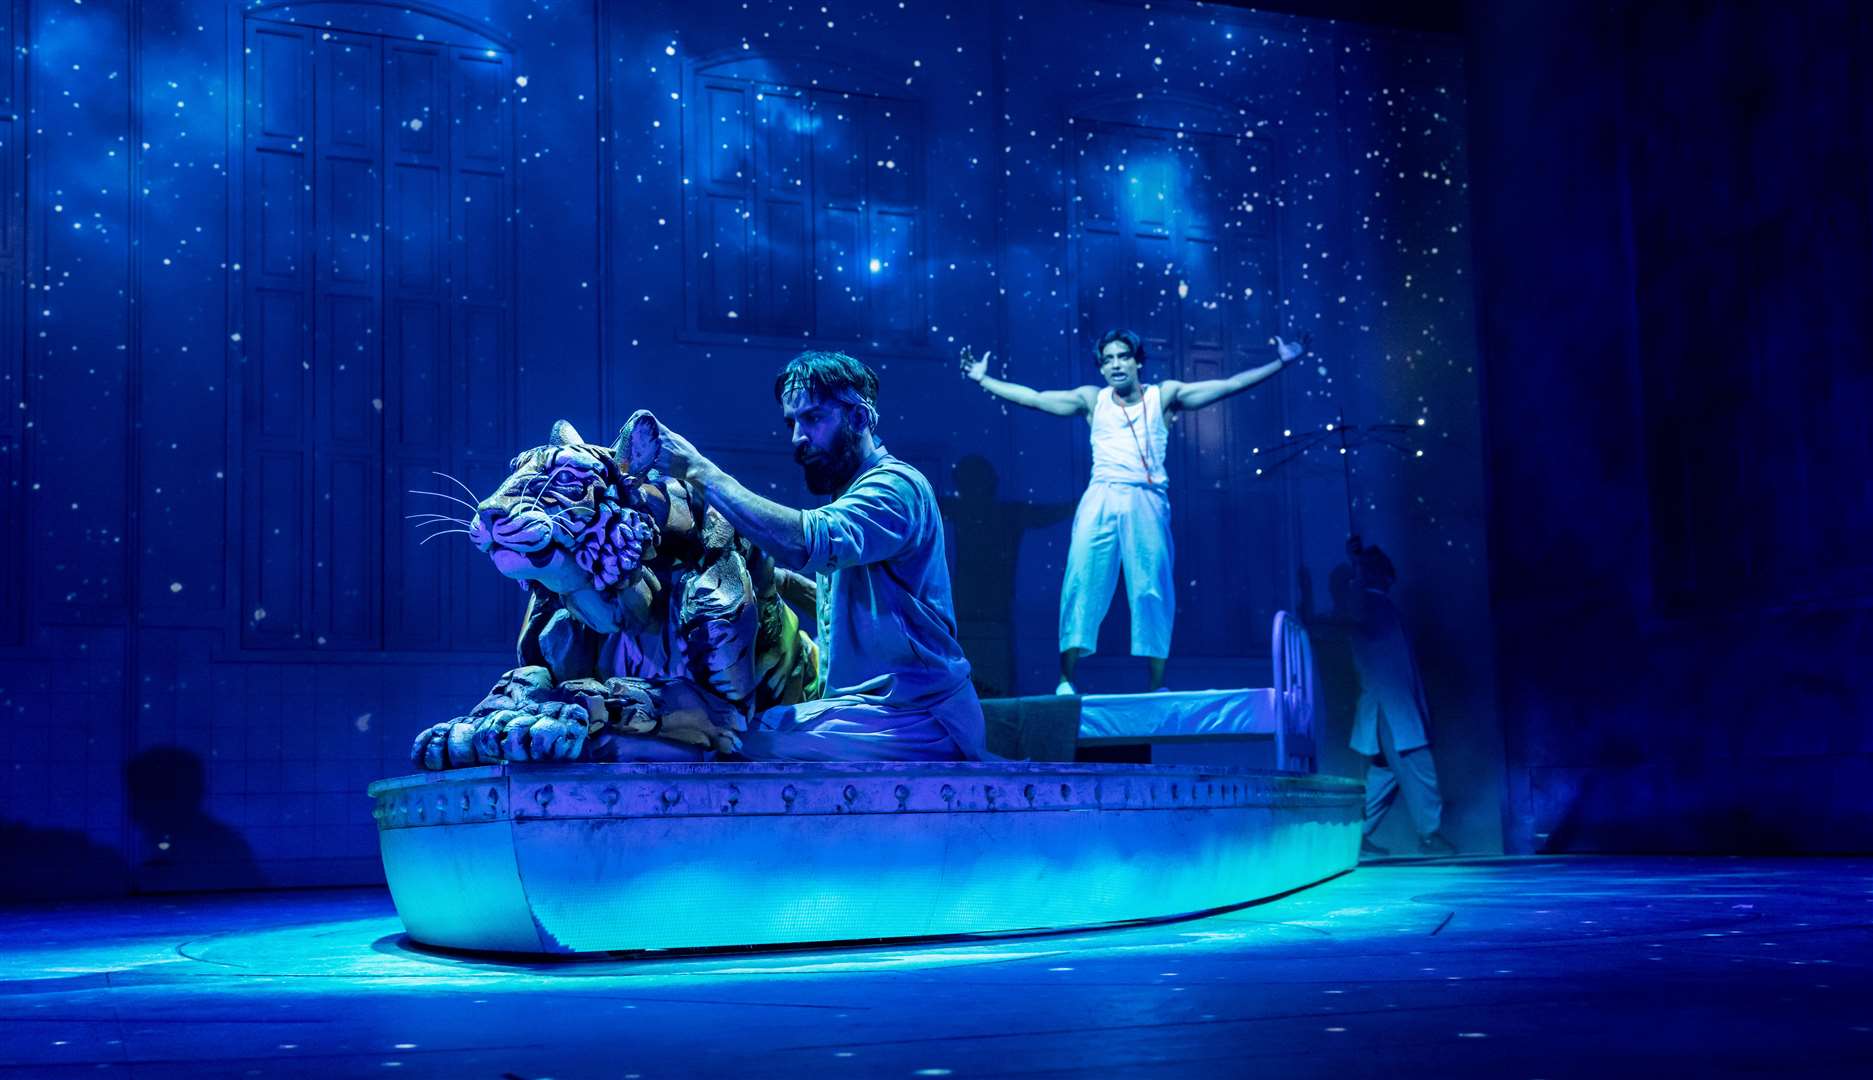 The play follows Pi Patel, a teenager who is stranded on a lifeboat with a Bengal tiger after a shipwreck in the Pacific Ocean. Picture: Johan Persson